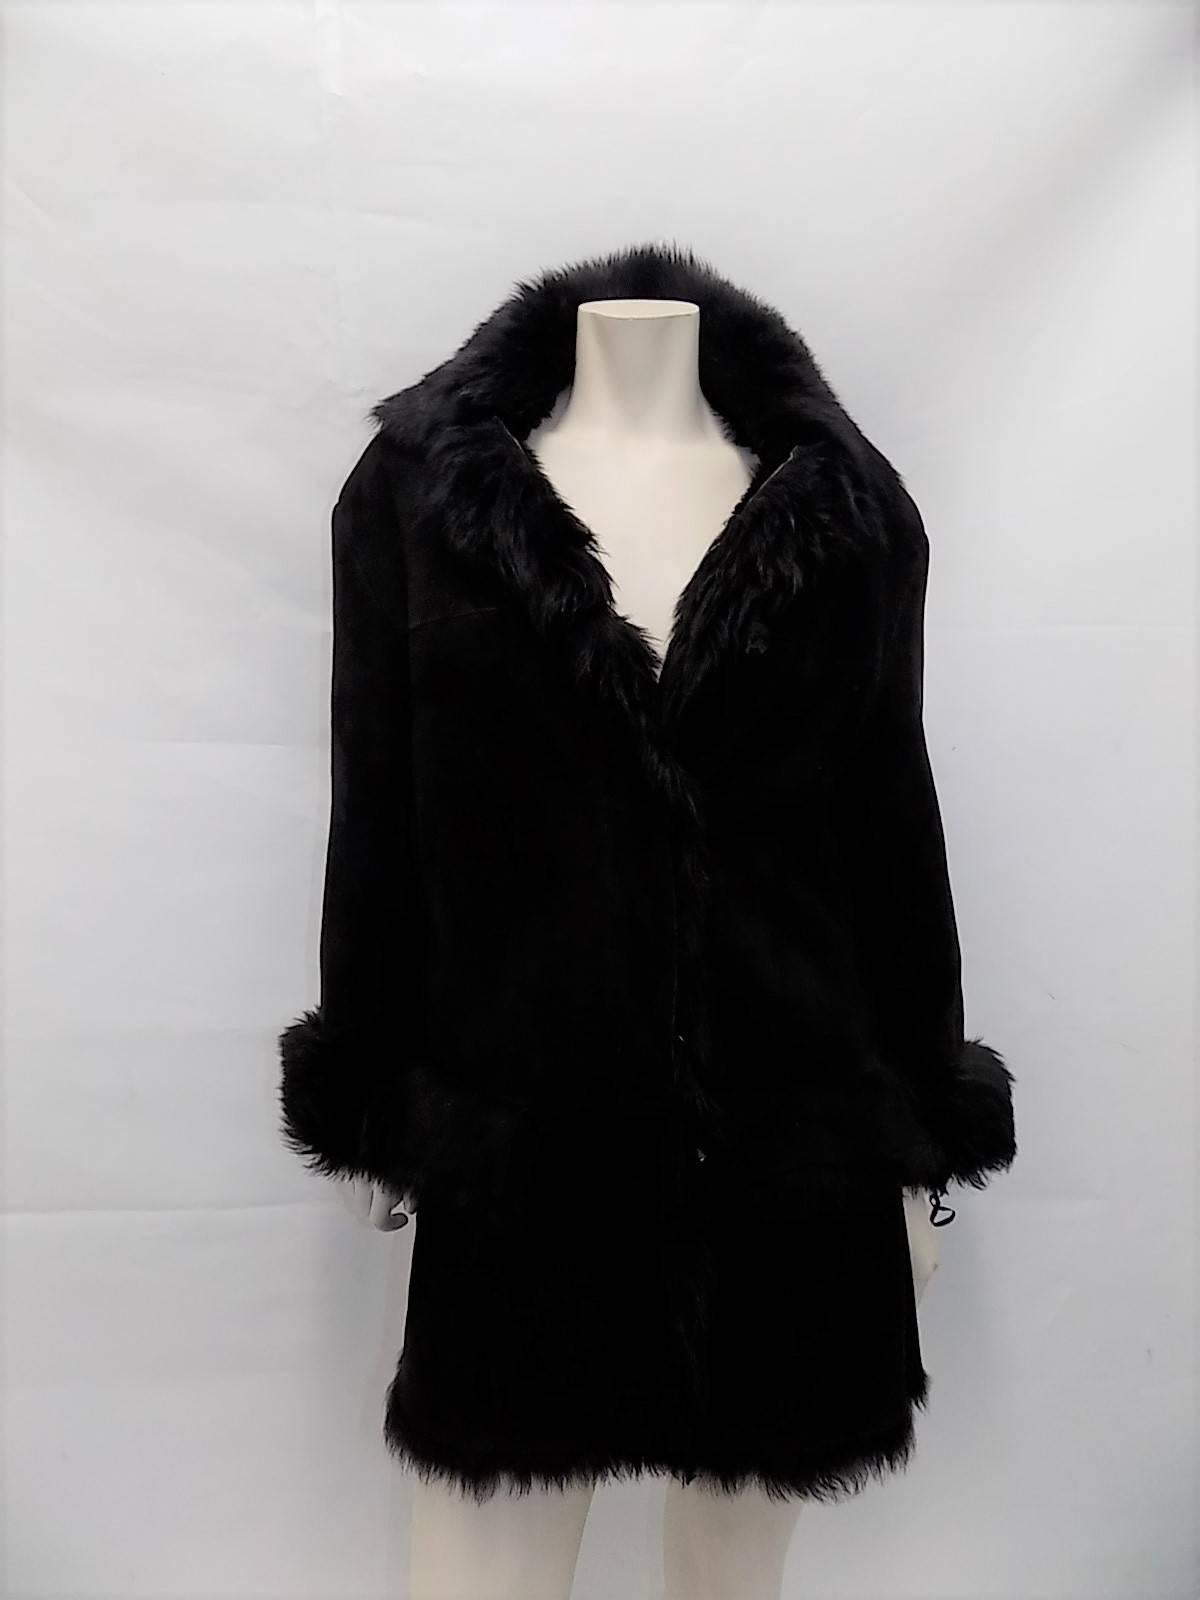 Pristine condition fabulous long hair Gucci black shearling. Perfect length. Coat is light in weight but extremely warm. Features  canceled from buttons closure, two  pockets, high collar and cuffs. Size Italian 40 US 4 . Pristine condition. 